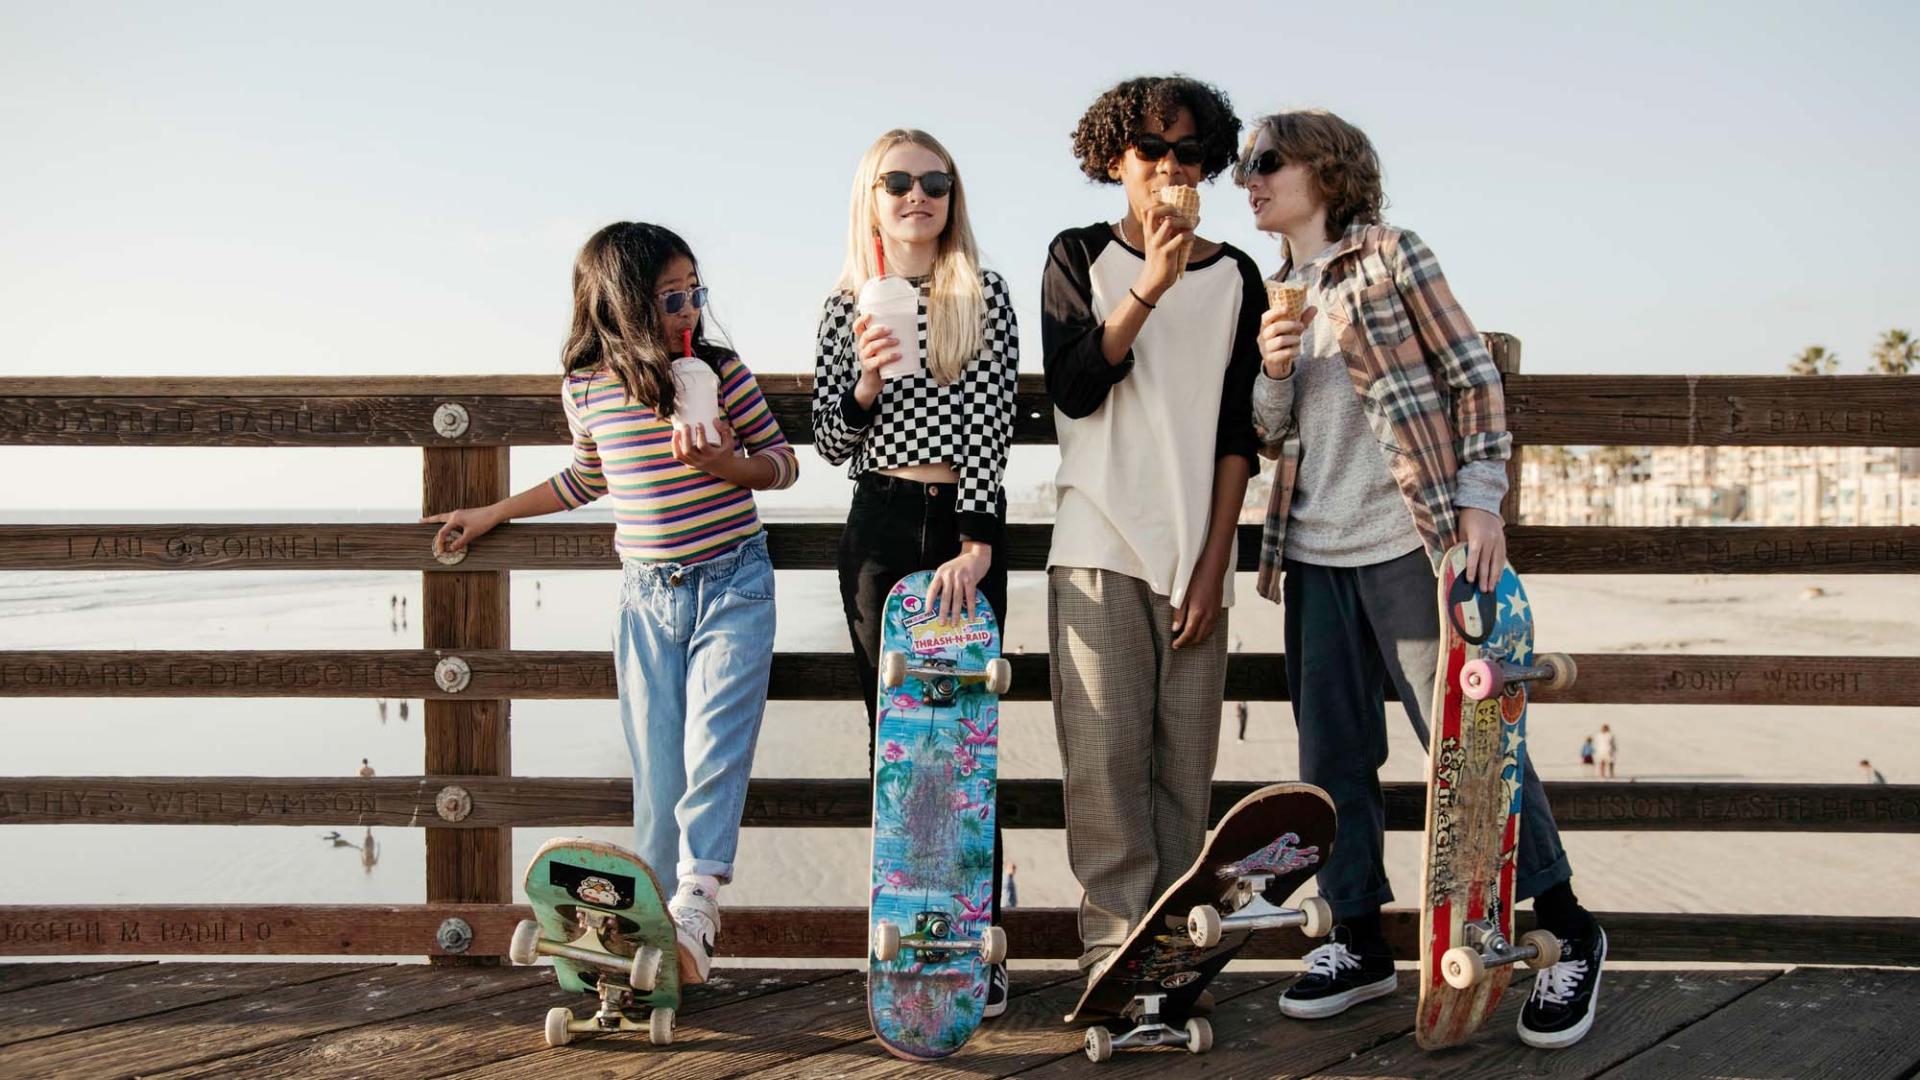 A group of four kids and children standing together. They wear sunglasses drink milkshakes and eat ice cream. All four have skateboards.